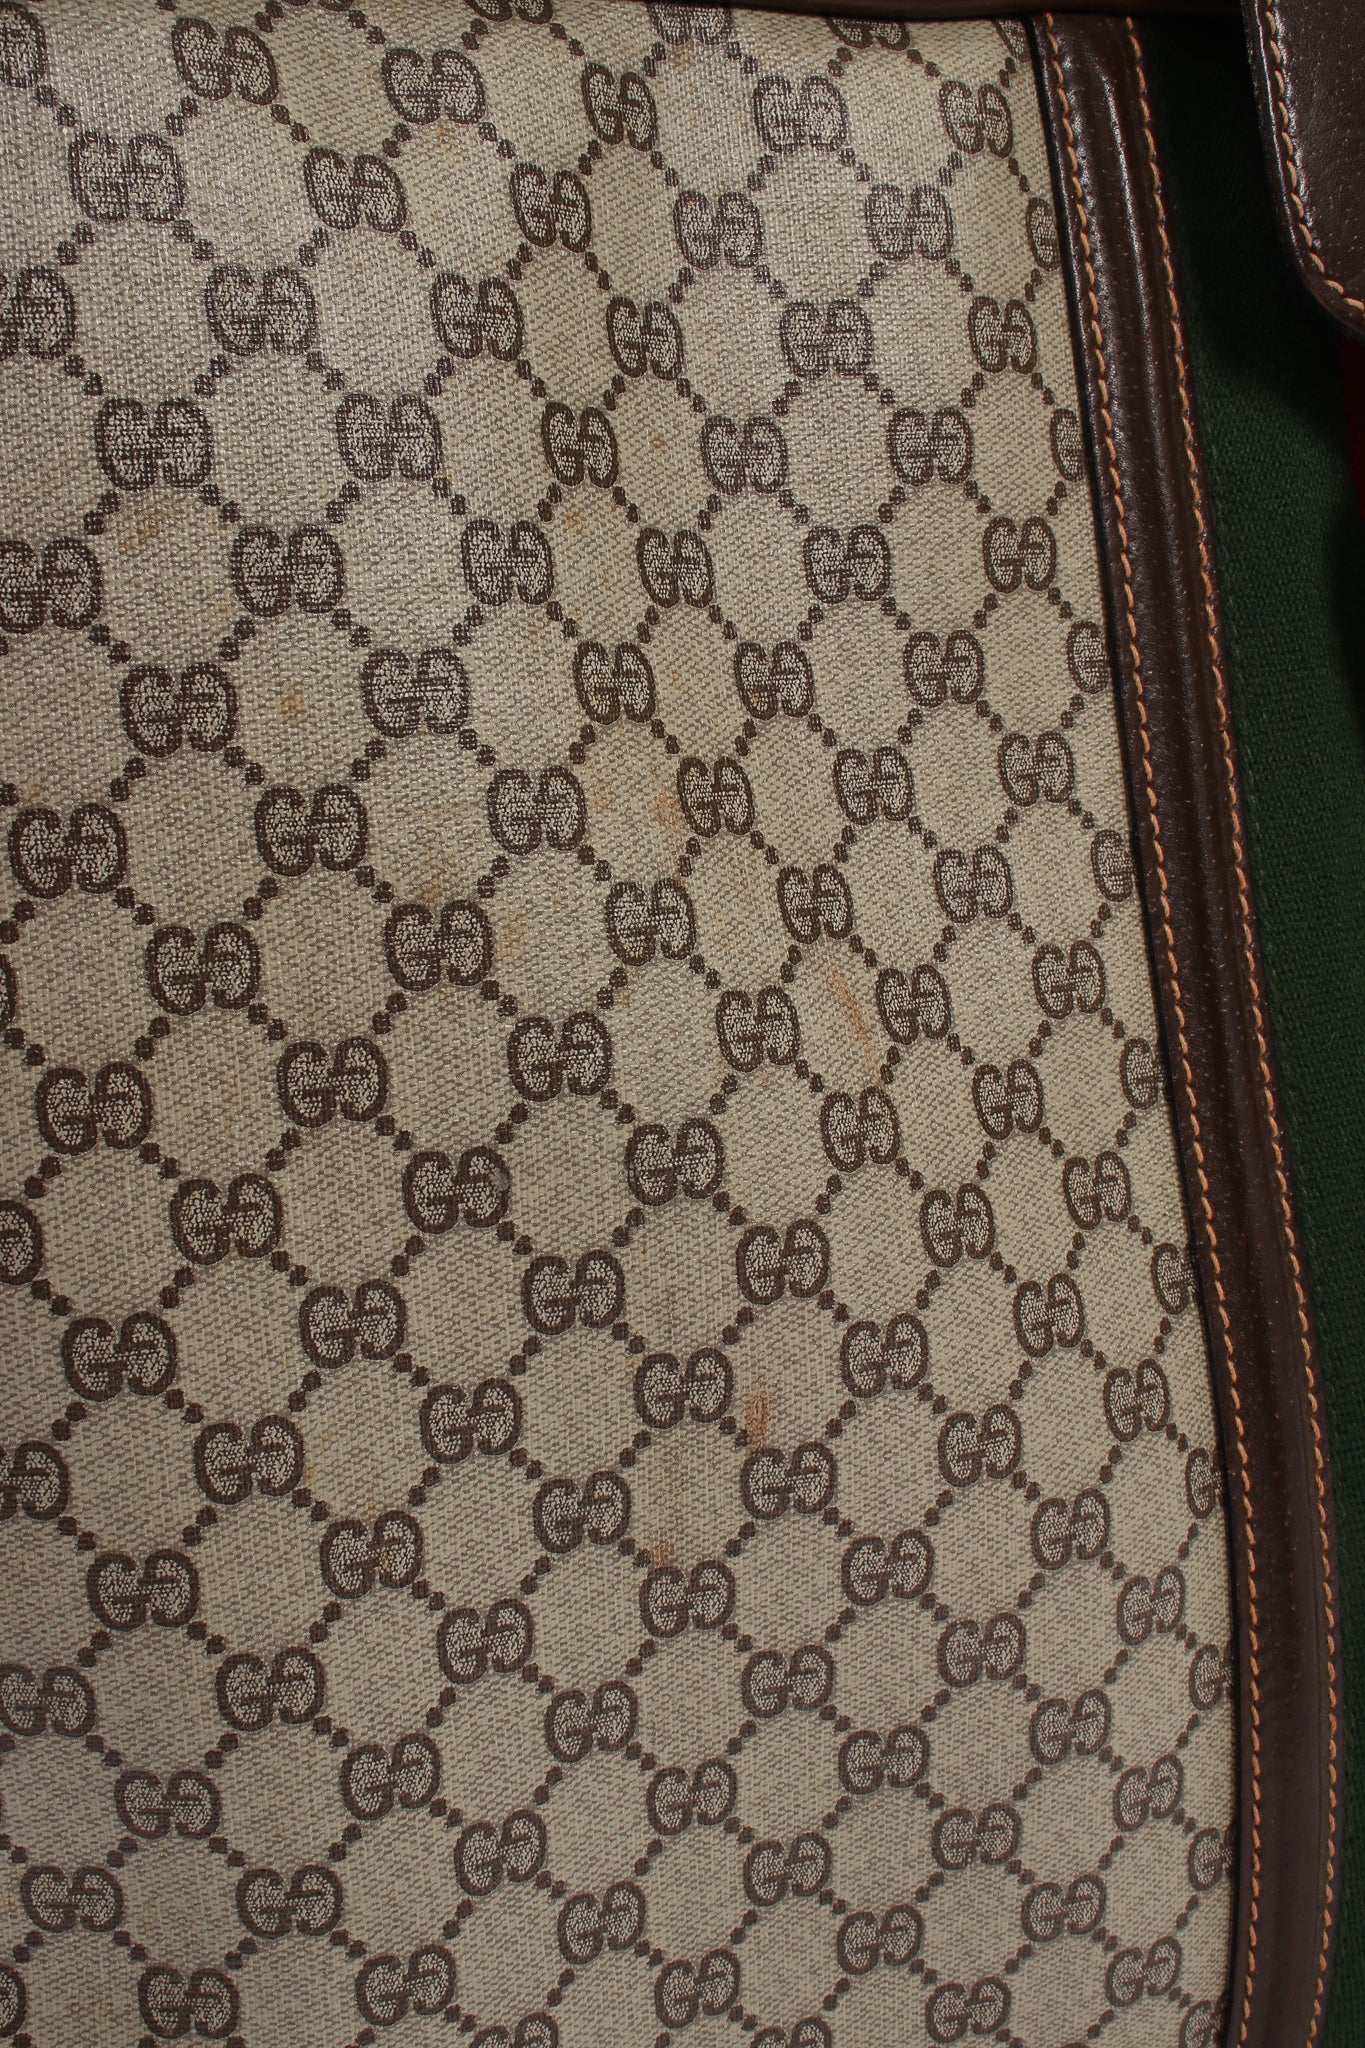 Vintage Gucci Monogram Stripe Suitcase front fabric stain at Recess Los Angeles